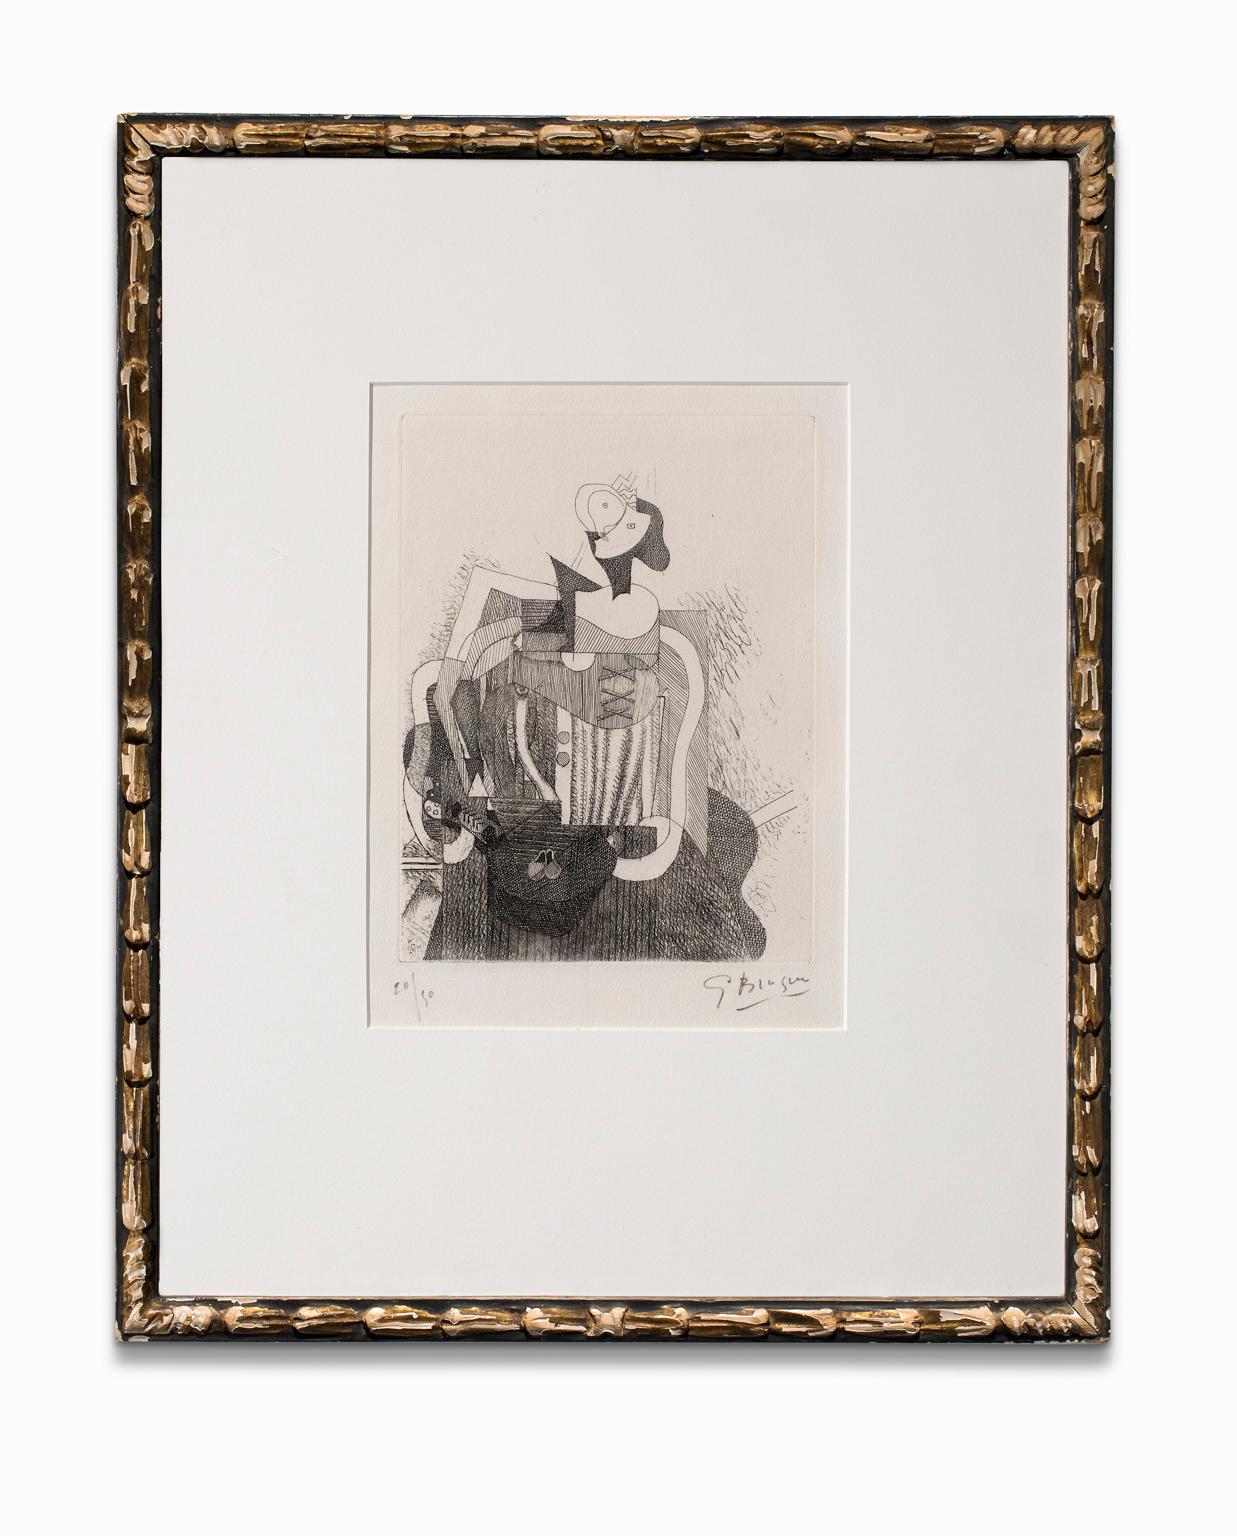 George Braque Abstract Print - "La Femme Assise", Cubist Etching, Signed and Numbered in Pencil by the Artist